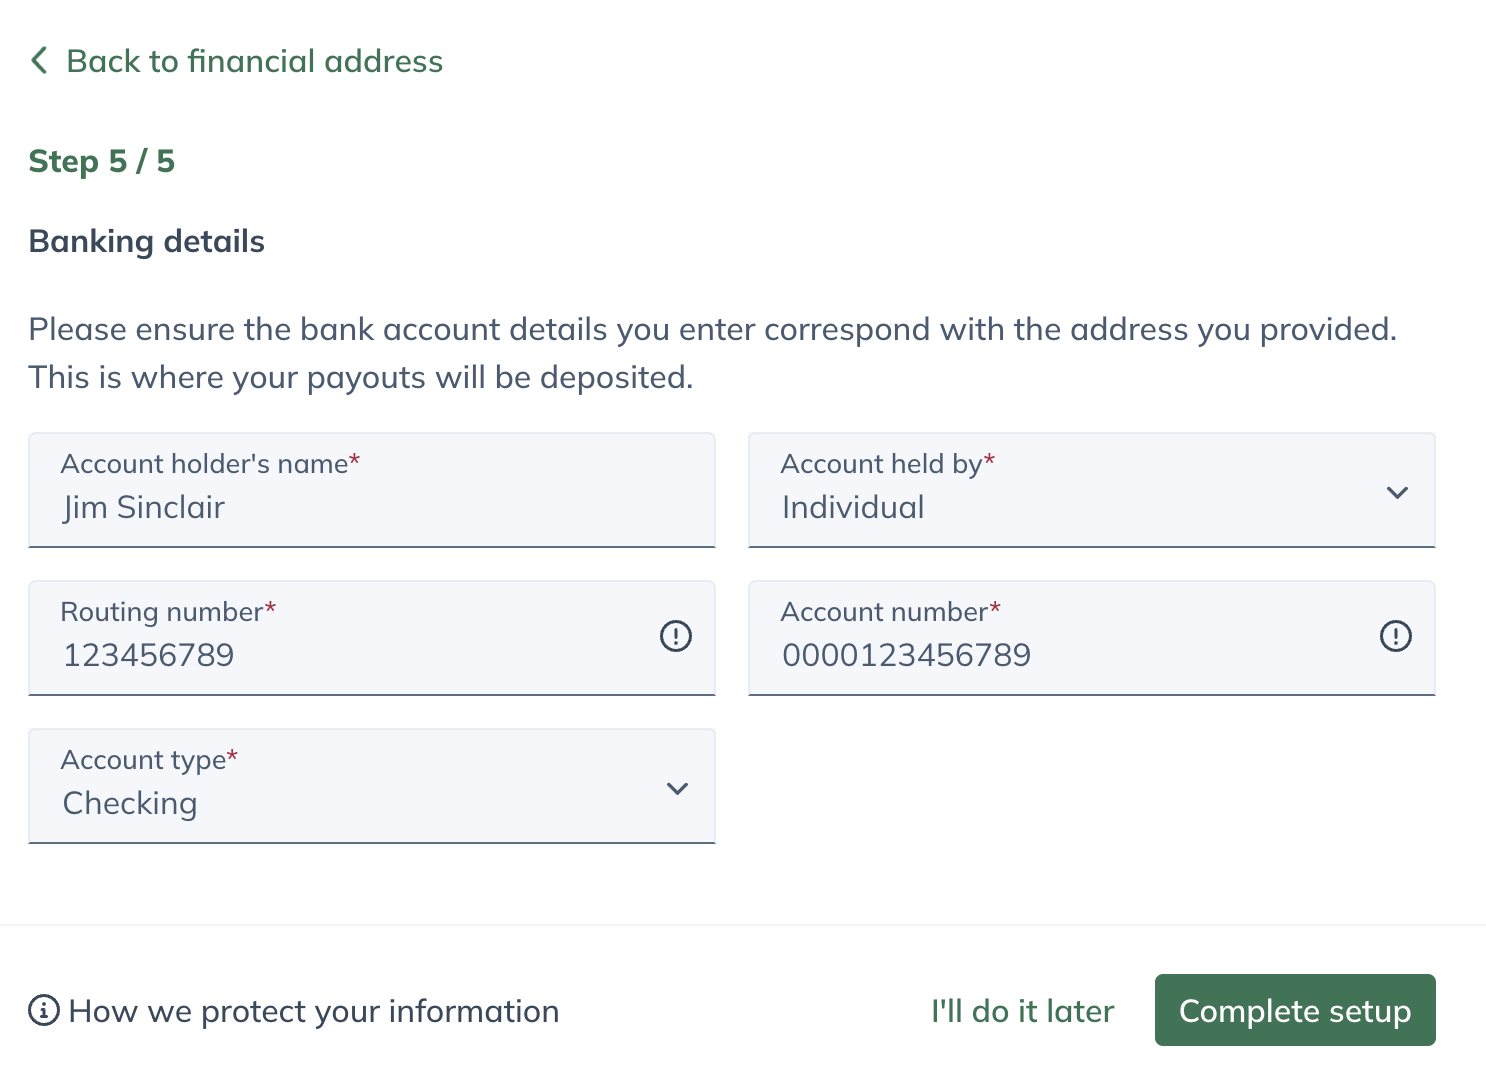 Enter your bank account and click Complete setup to finish setting up your account and close the modal.